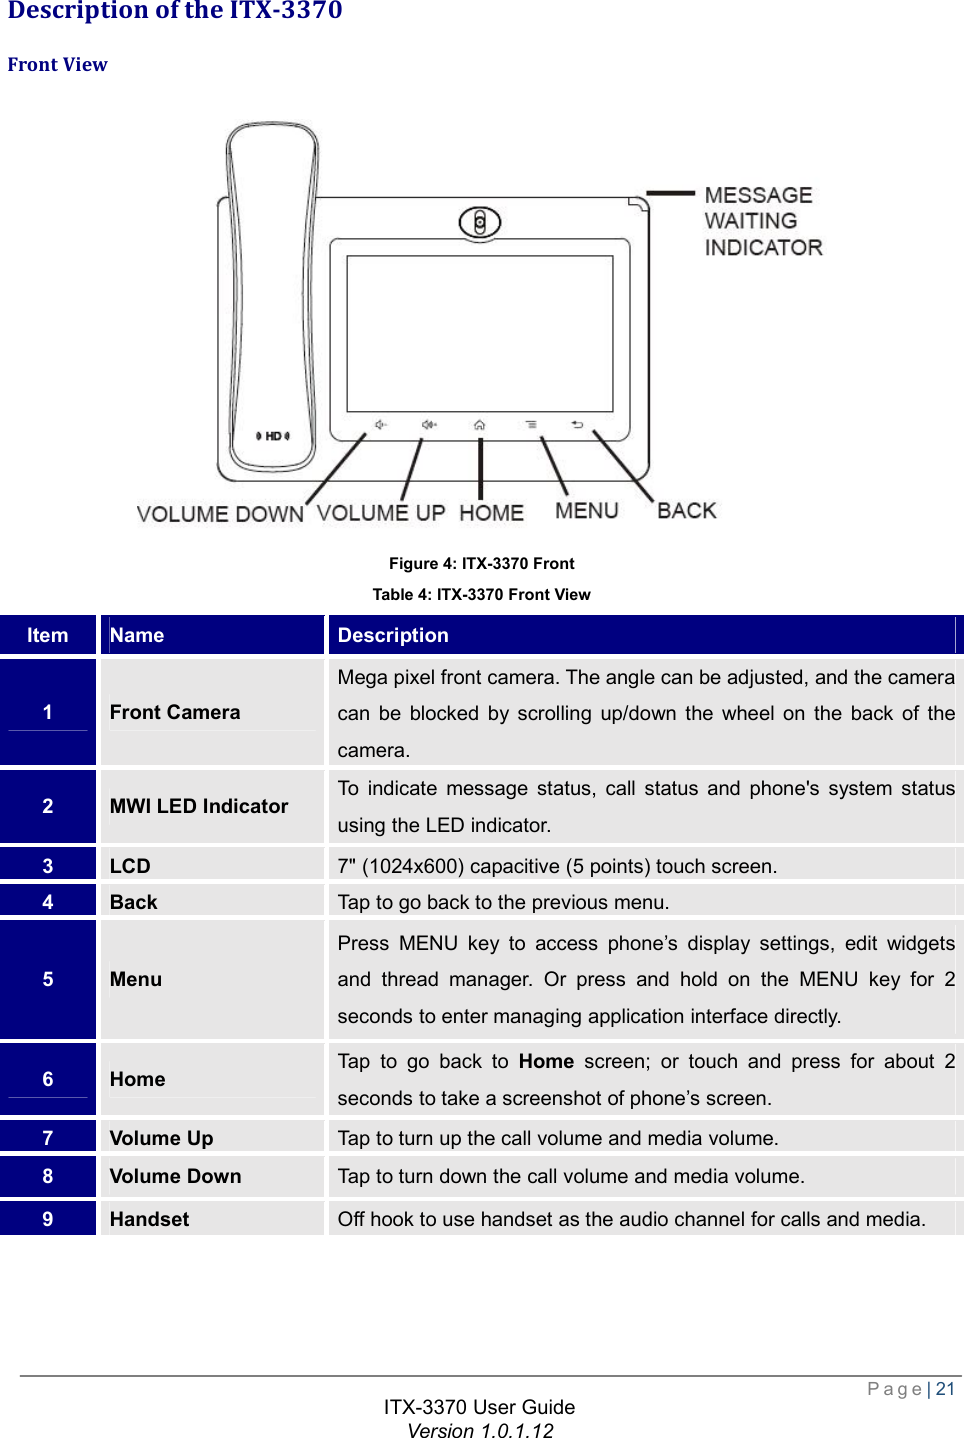  Page| 21  ITX-3370 User Guide Version 1.0.1.12  Description of the ITX-3370 Front View  Figure 4: ITX-3370 Front Table 4: ITX-3370 Front View Item  Name  Description 1  Front Camera Mega pixel front camera. The angle can be adjusted, and the camera can be blocked by scrolling up/down the wheel on the back of the camera. 2  MWI LED Indicator  To indicate message status, call status and phone&apos;s system status using the LED indicator. 3  LCD  7&quot; (1024x600) capacitive (5 points) touch screen. 4  Back  Tap to go back to the previous menu. 5  Menu Press MENU key to access phone’s display settings, edit widgets and thread manager. Or press and hold on the MENU key for 2 seconds to enter managing application interface directly. 6  Home  Tap to go back to  Home screen; or touch and press for about 2 seconds to take a screenshot of phone’s screen. 7  Volume Up  Tap to turn up the call volume and media volume. 8  Volume Down  Tap to turn down the call volume and media volume. 9  Handset  Off hook to use handset as the audio channel for calls and media. 